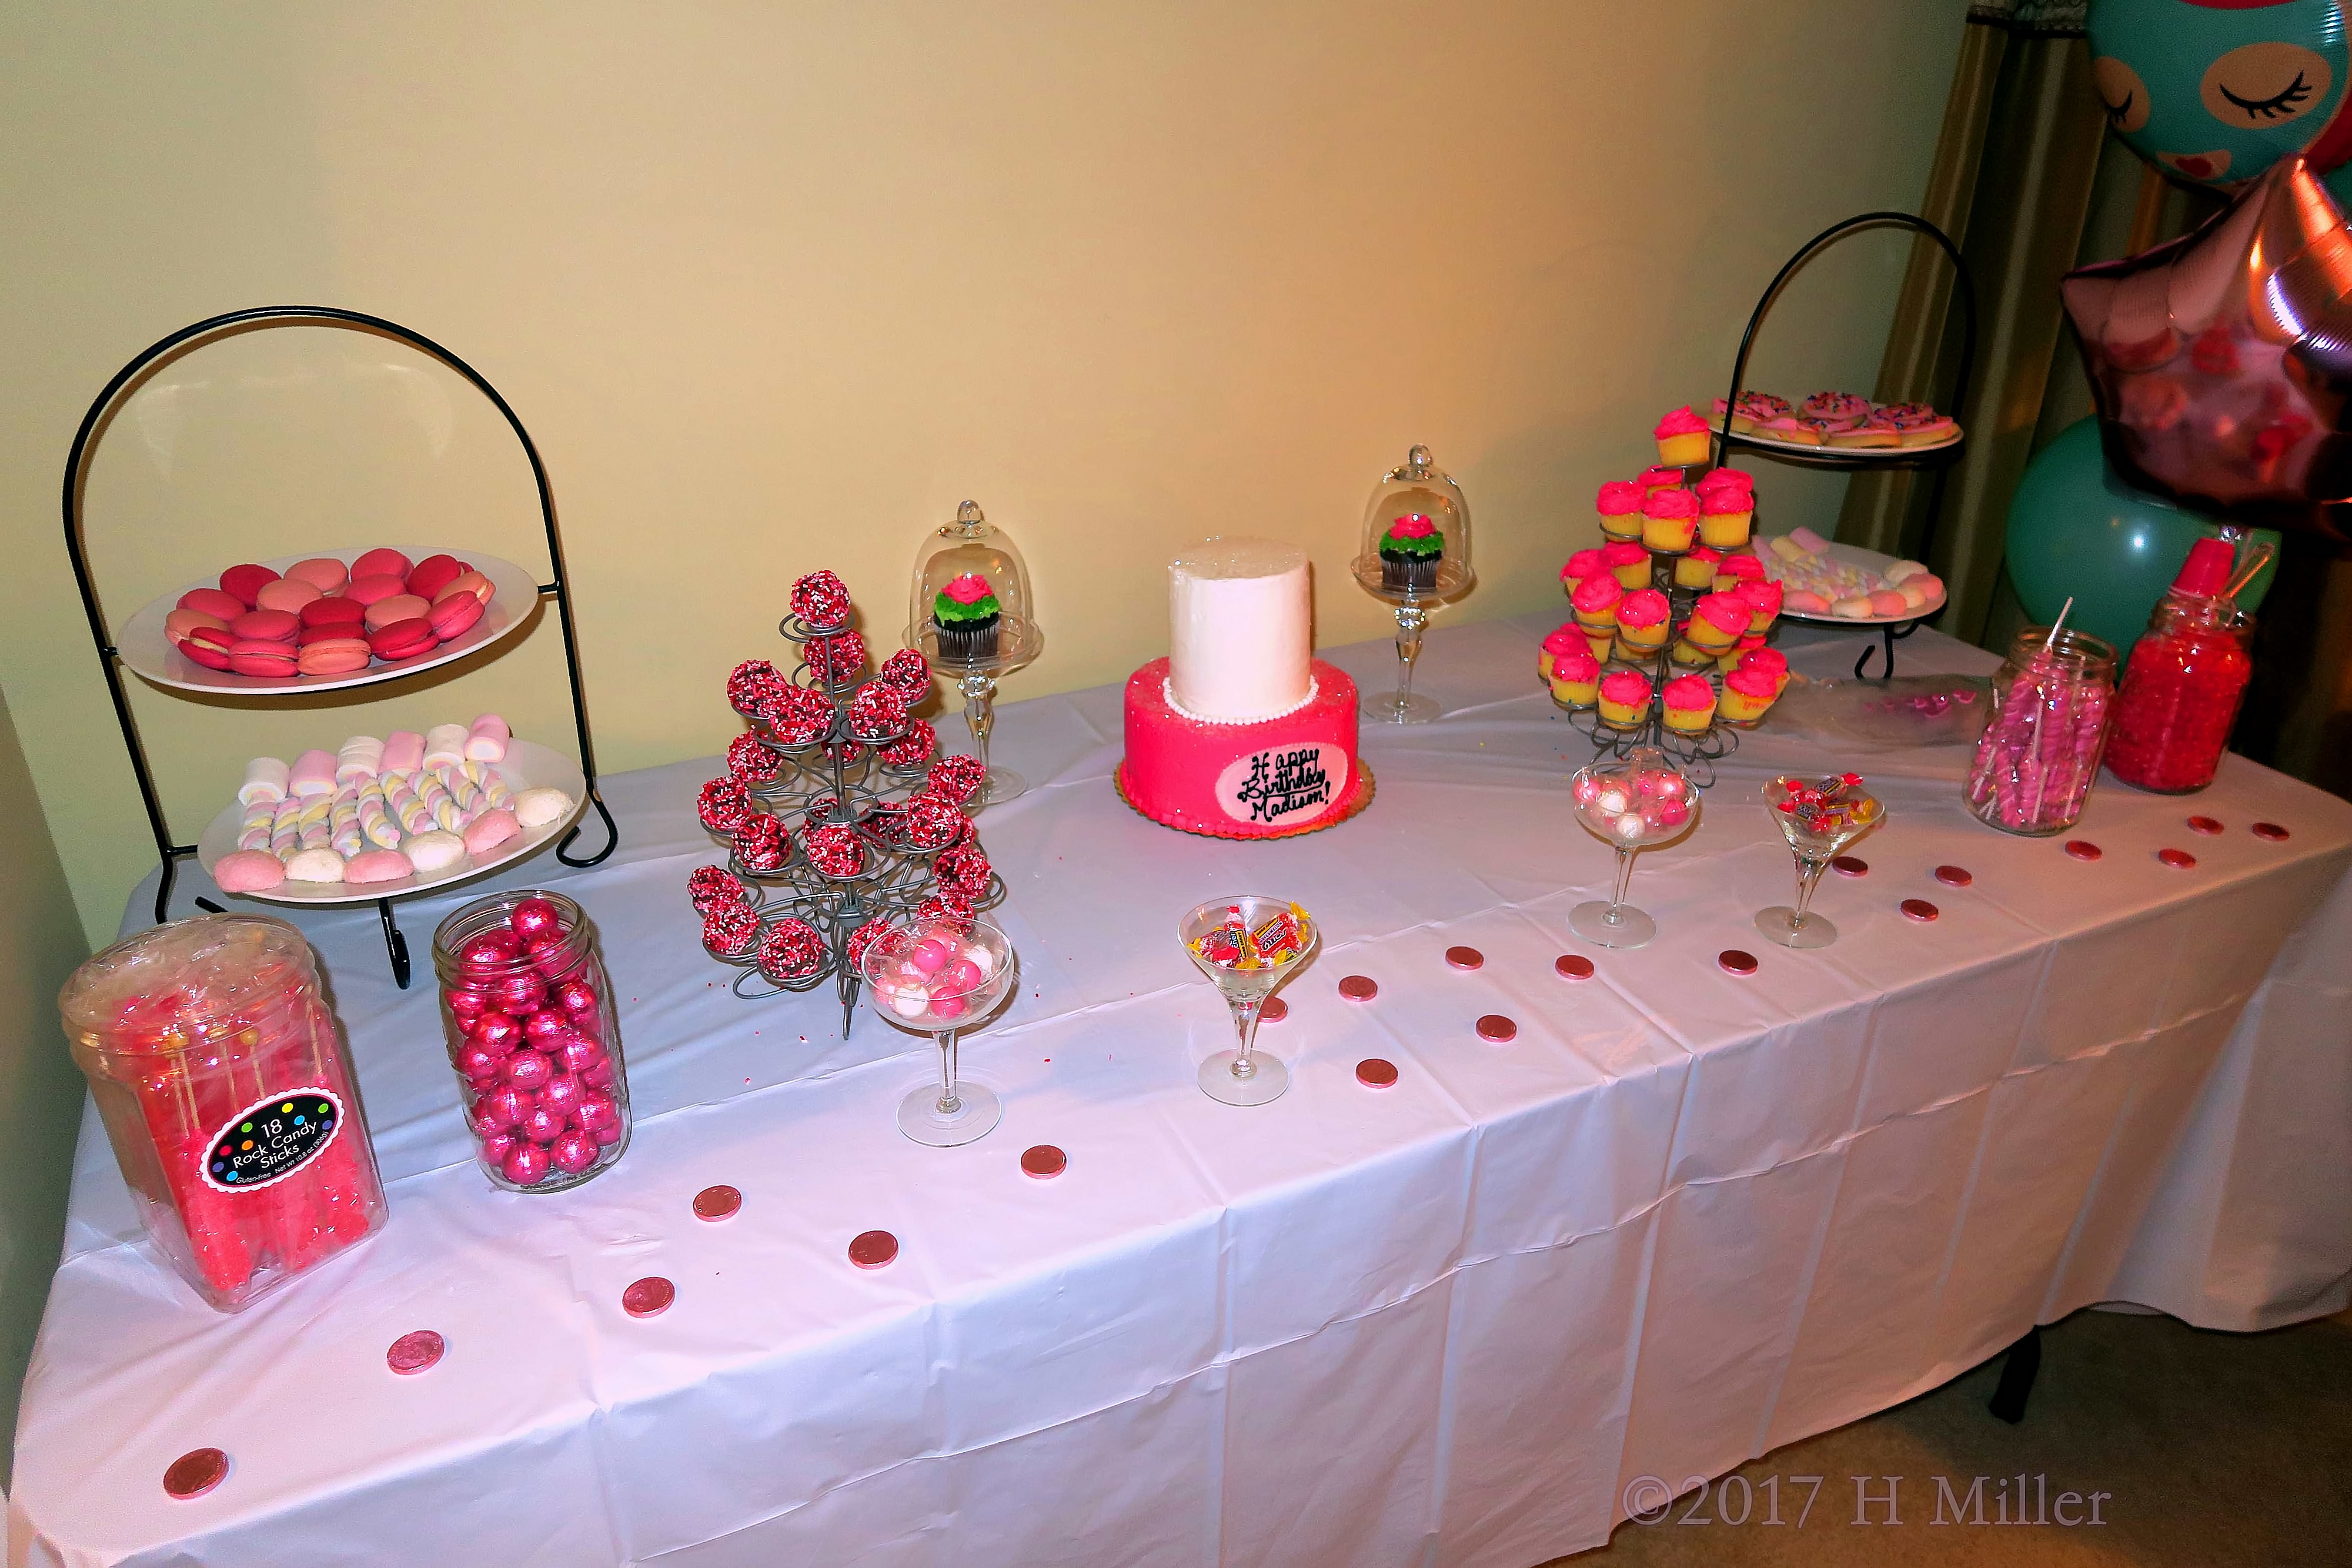 Who Else Is In Love With This Kids Spa Dessert Table! 4